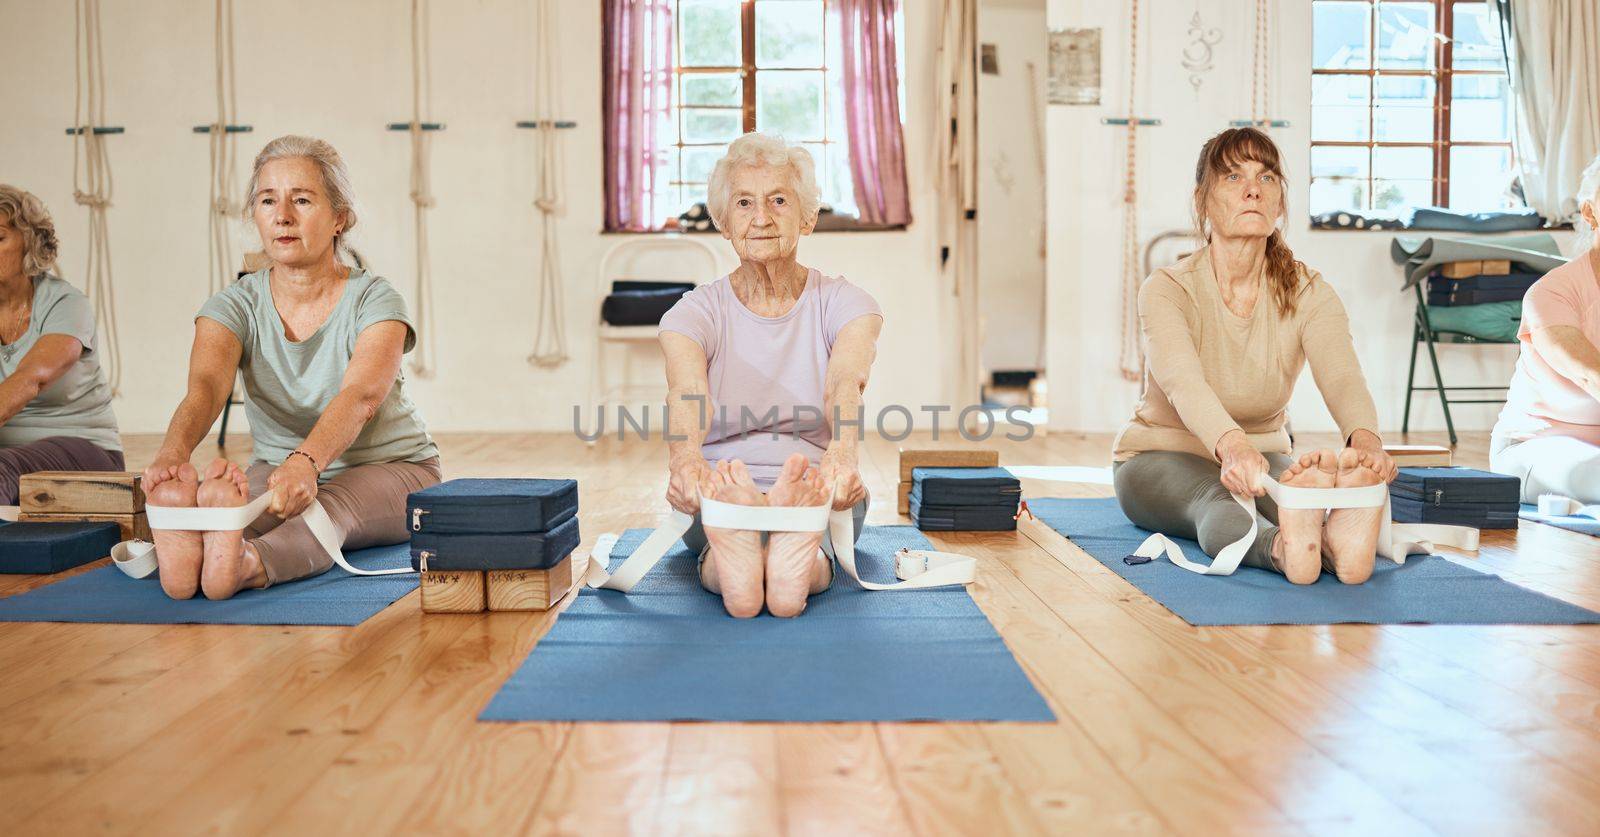 Yoga, exercise and senior women for balance, peace and wellness in a zen health studio together. Fitness, retirement and elderly friends doing a pilates workout for mind, body and spiritual wellness